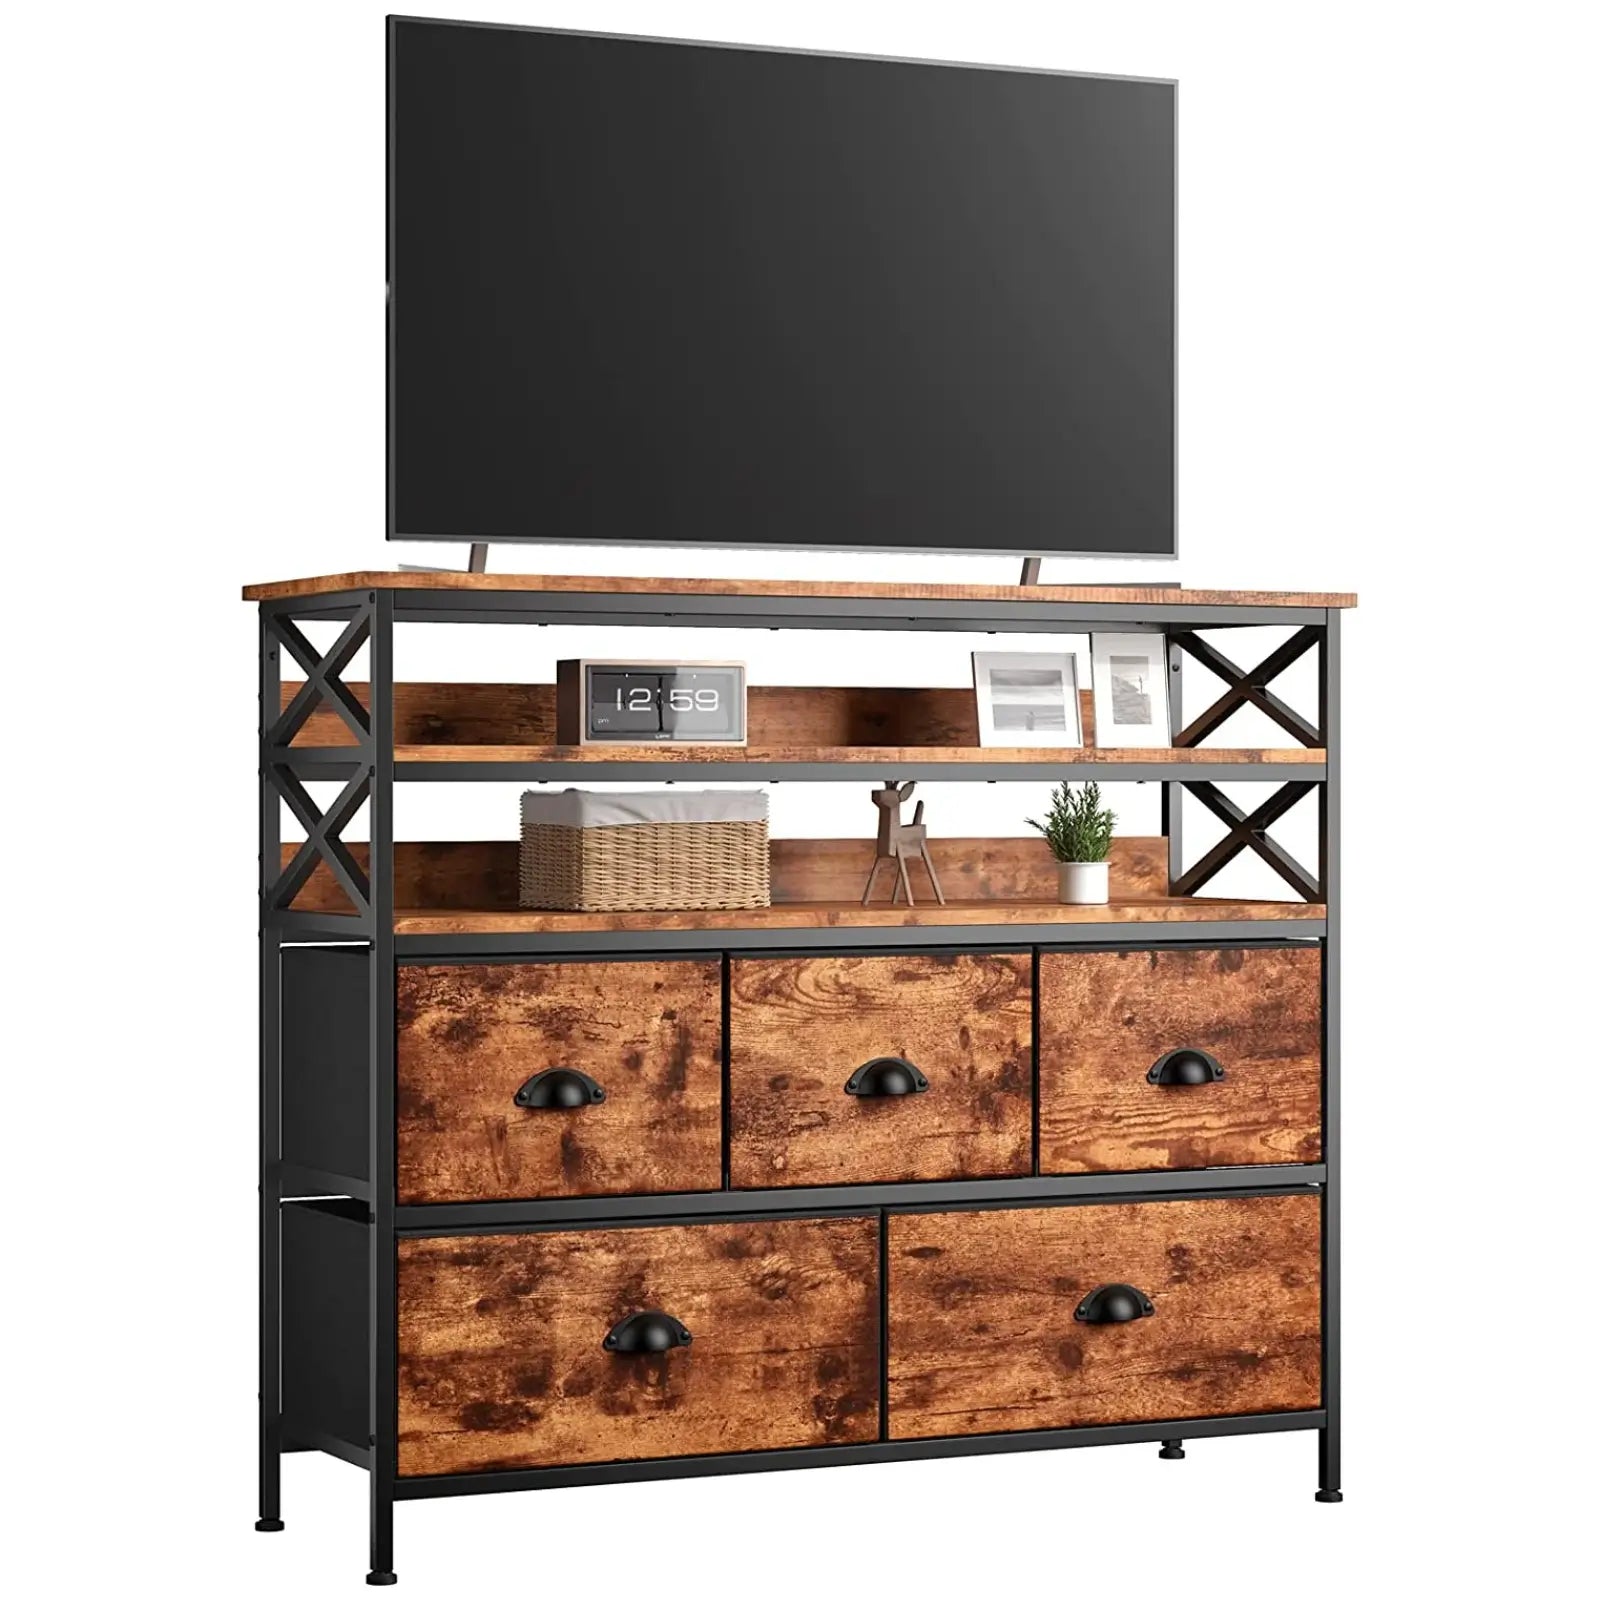 Enhomee TV Stand Dresser, Entertainment Center With 5 Fabric Drawers